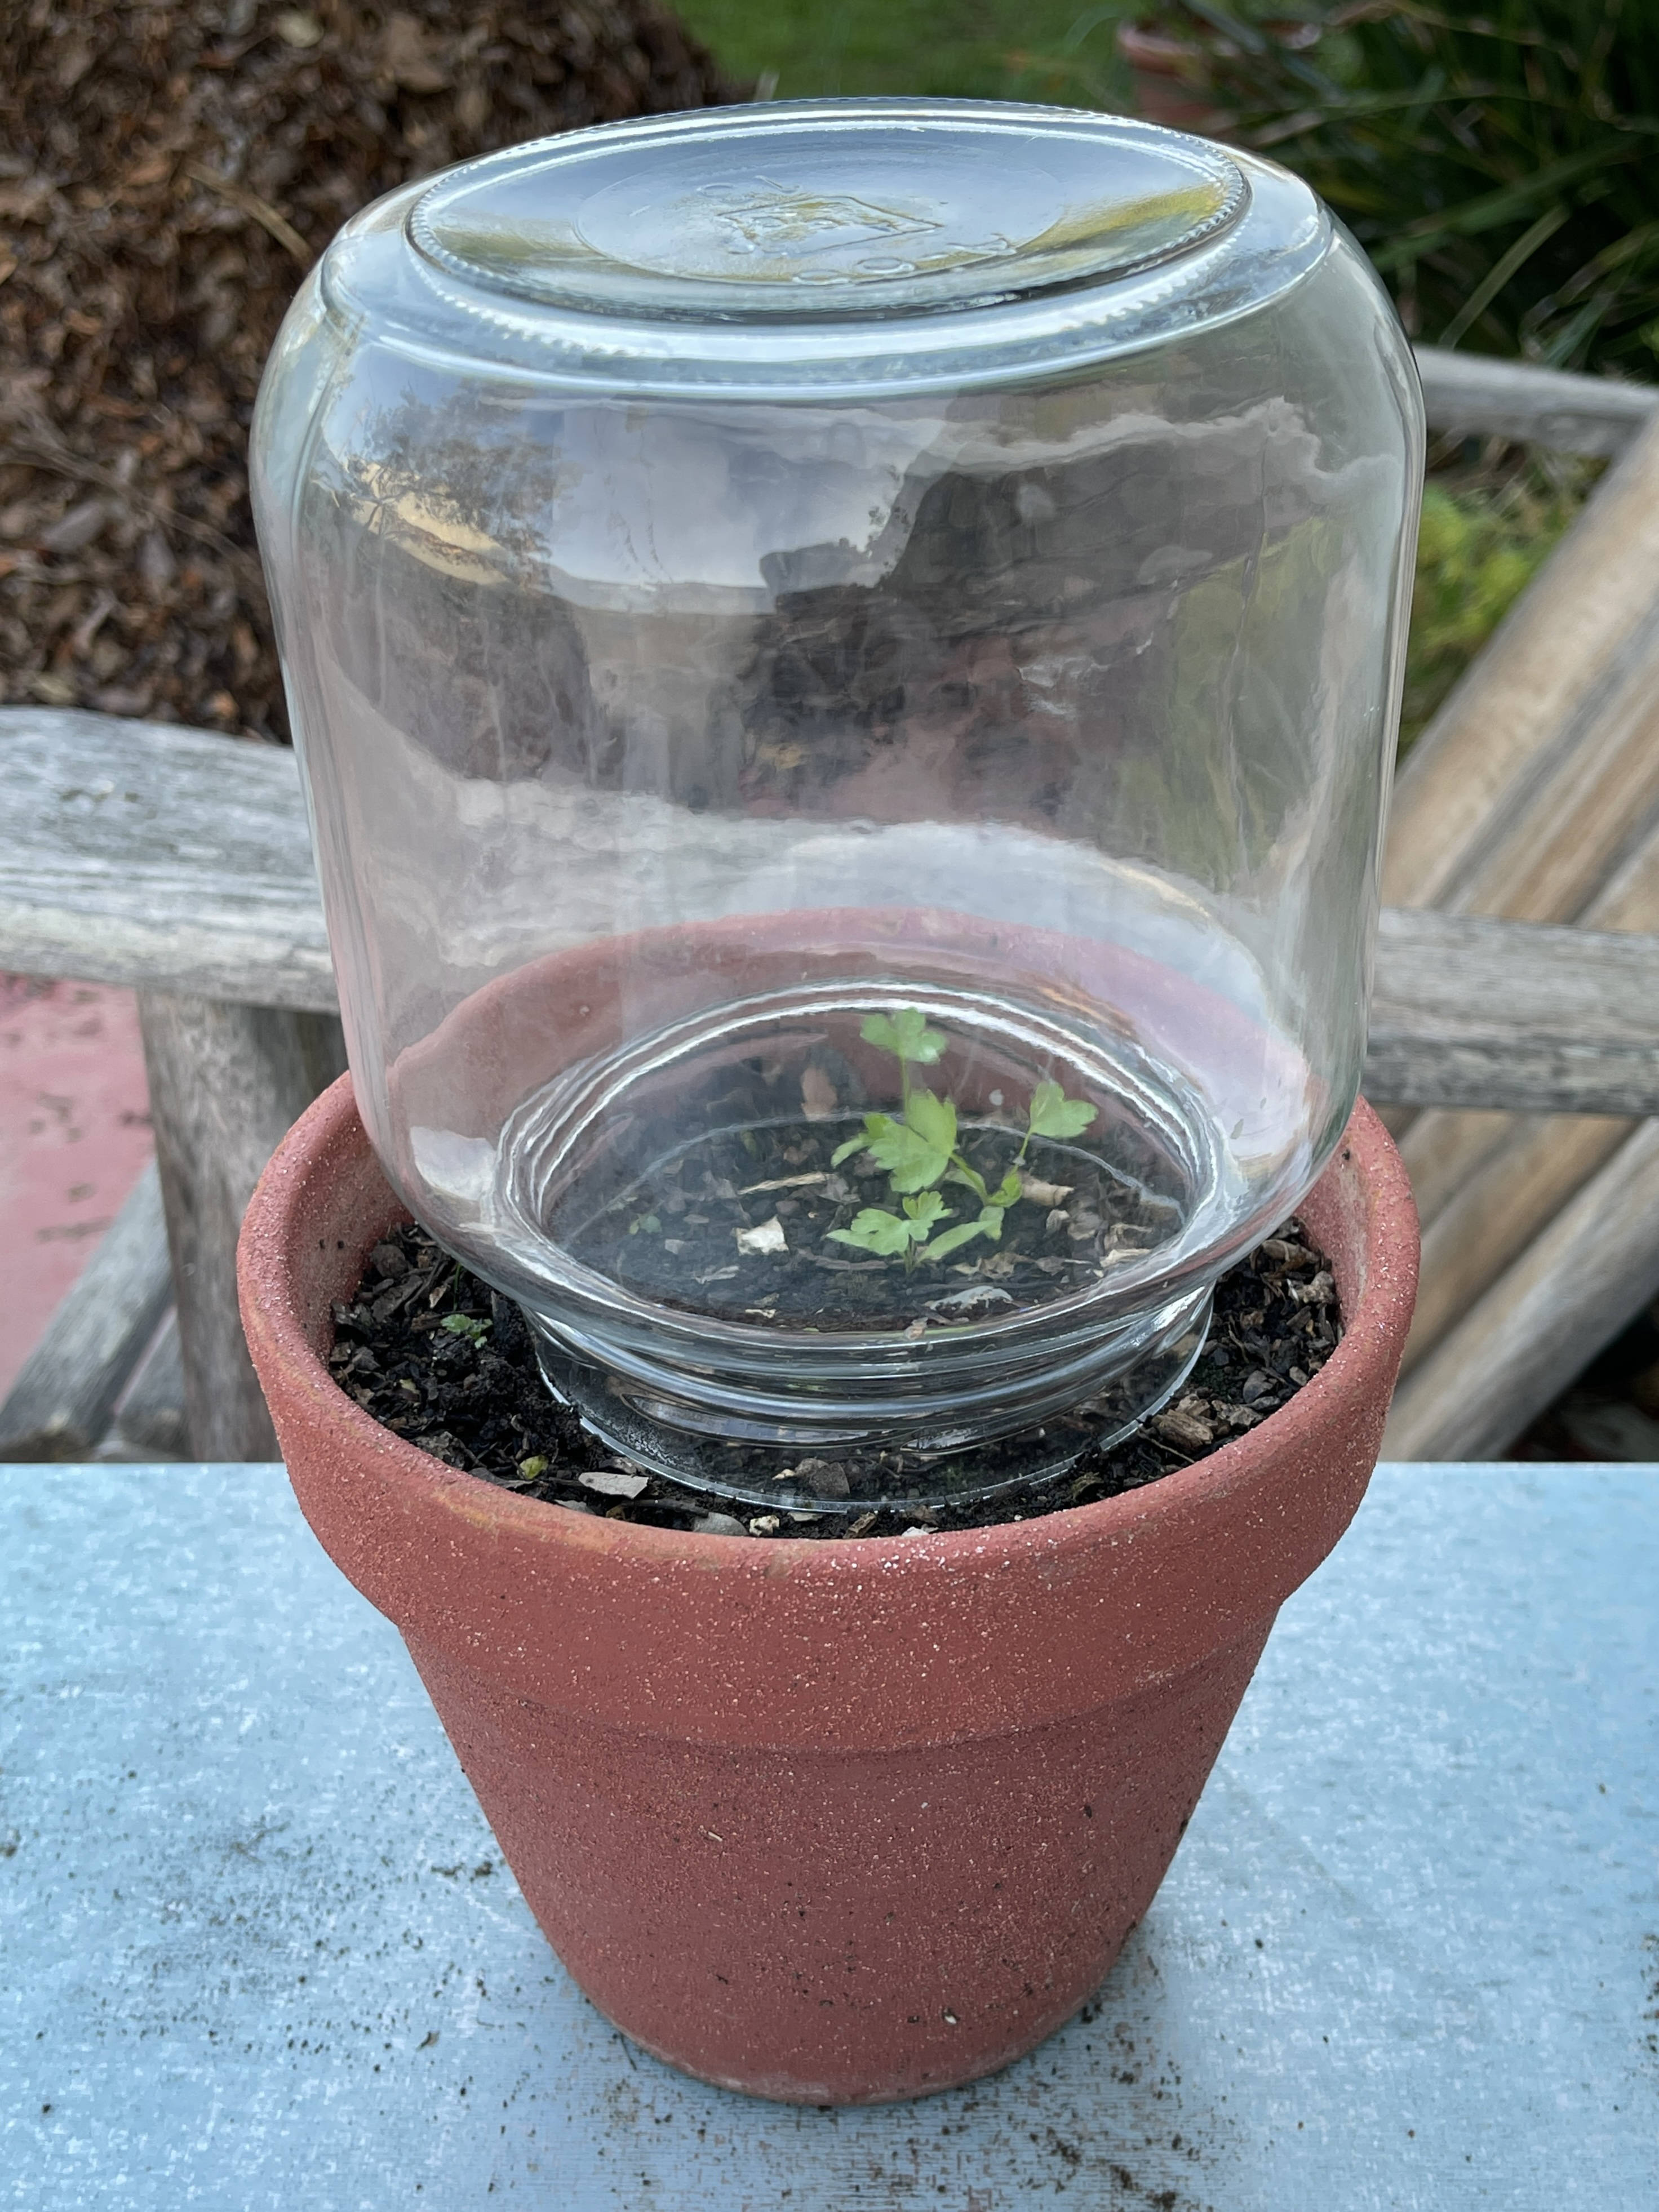 A glass jar covering a seeding in a terracotta pot protects it from frost for plastic-free gardening